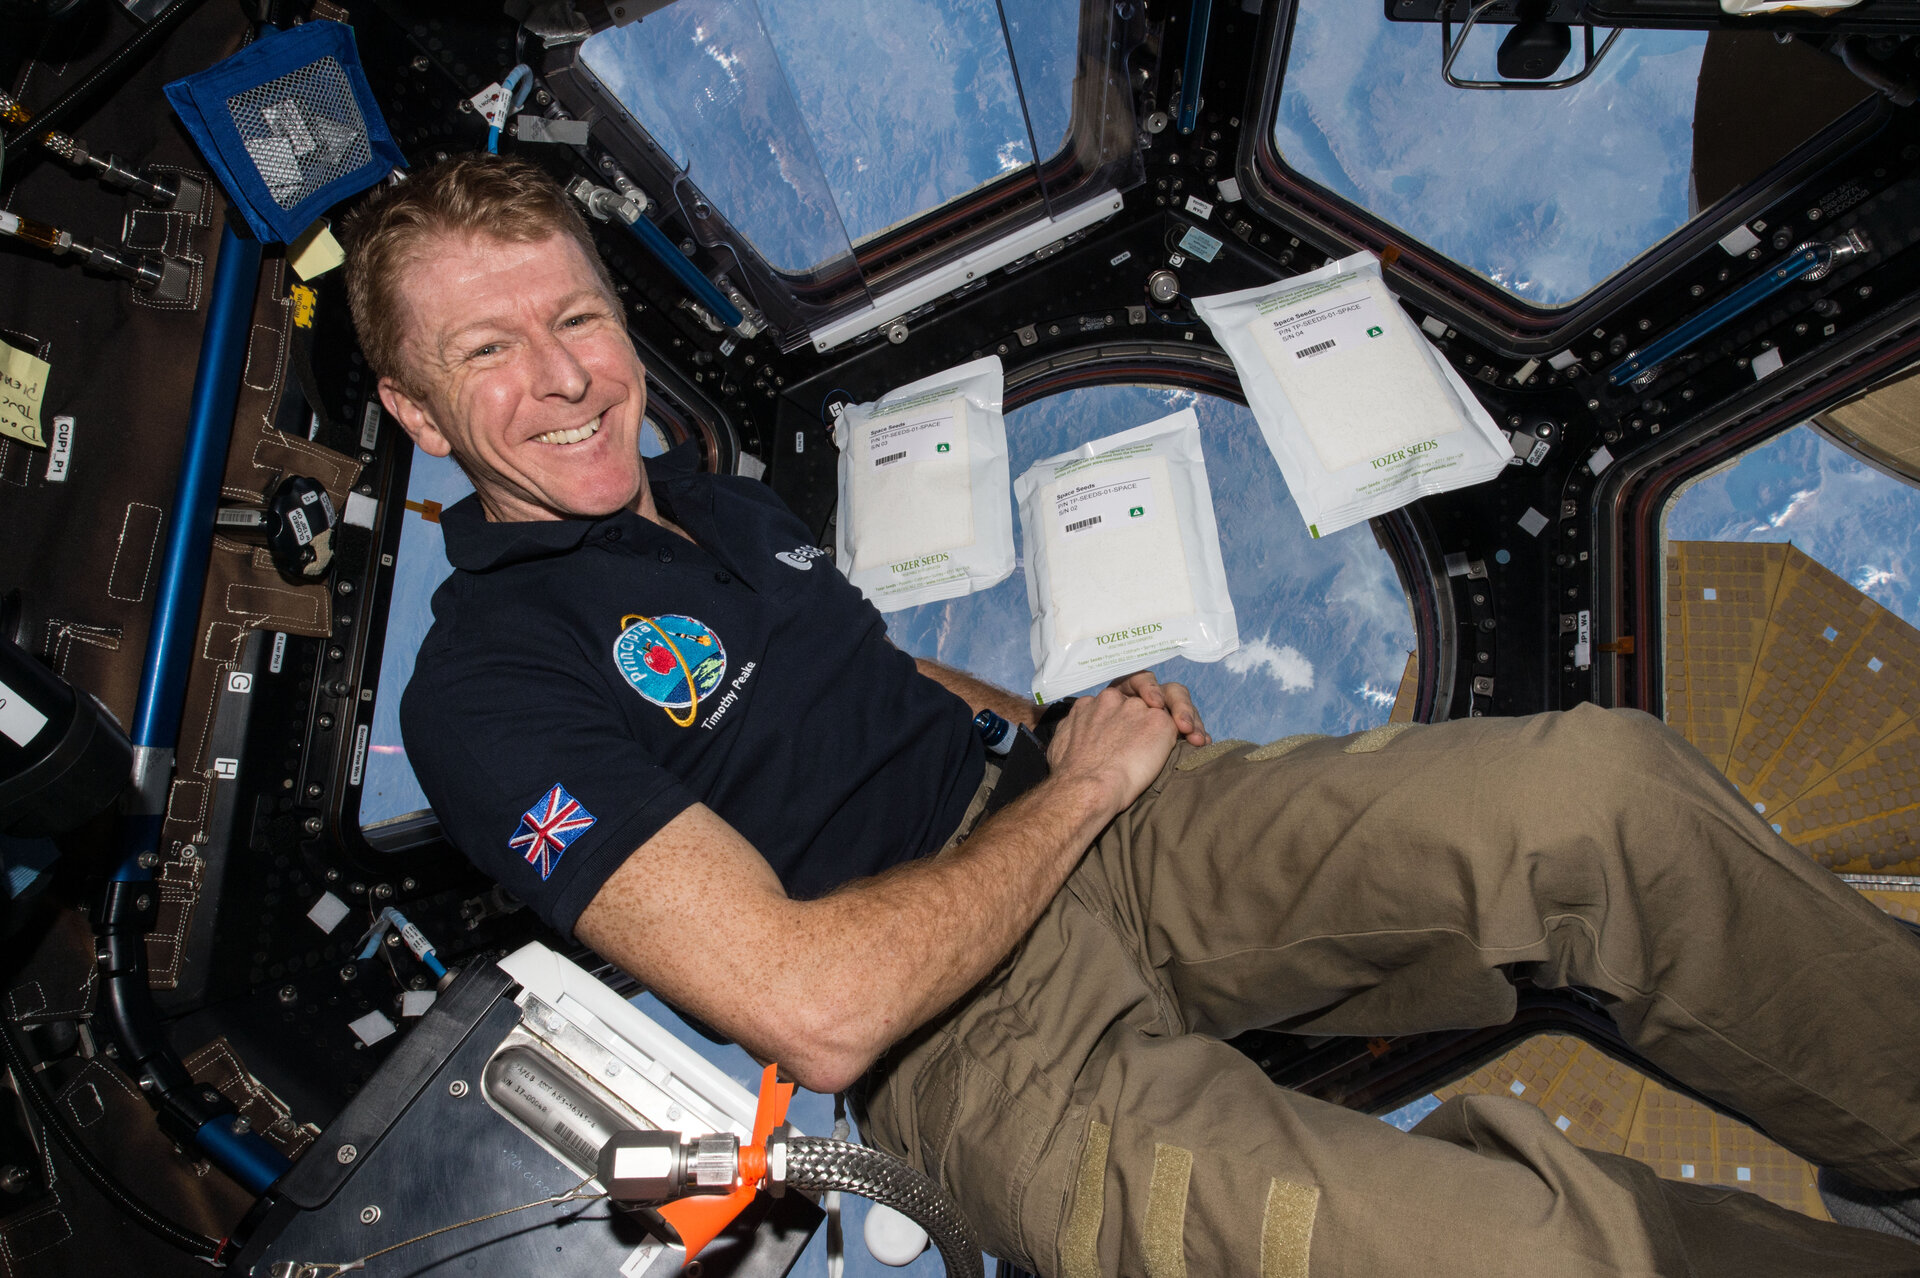 The IET Awards Tim Peake with Honorary Fellowship at its 150th Anniversary